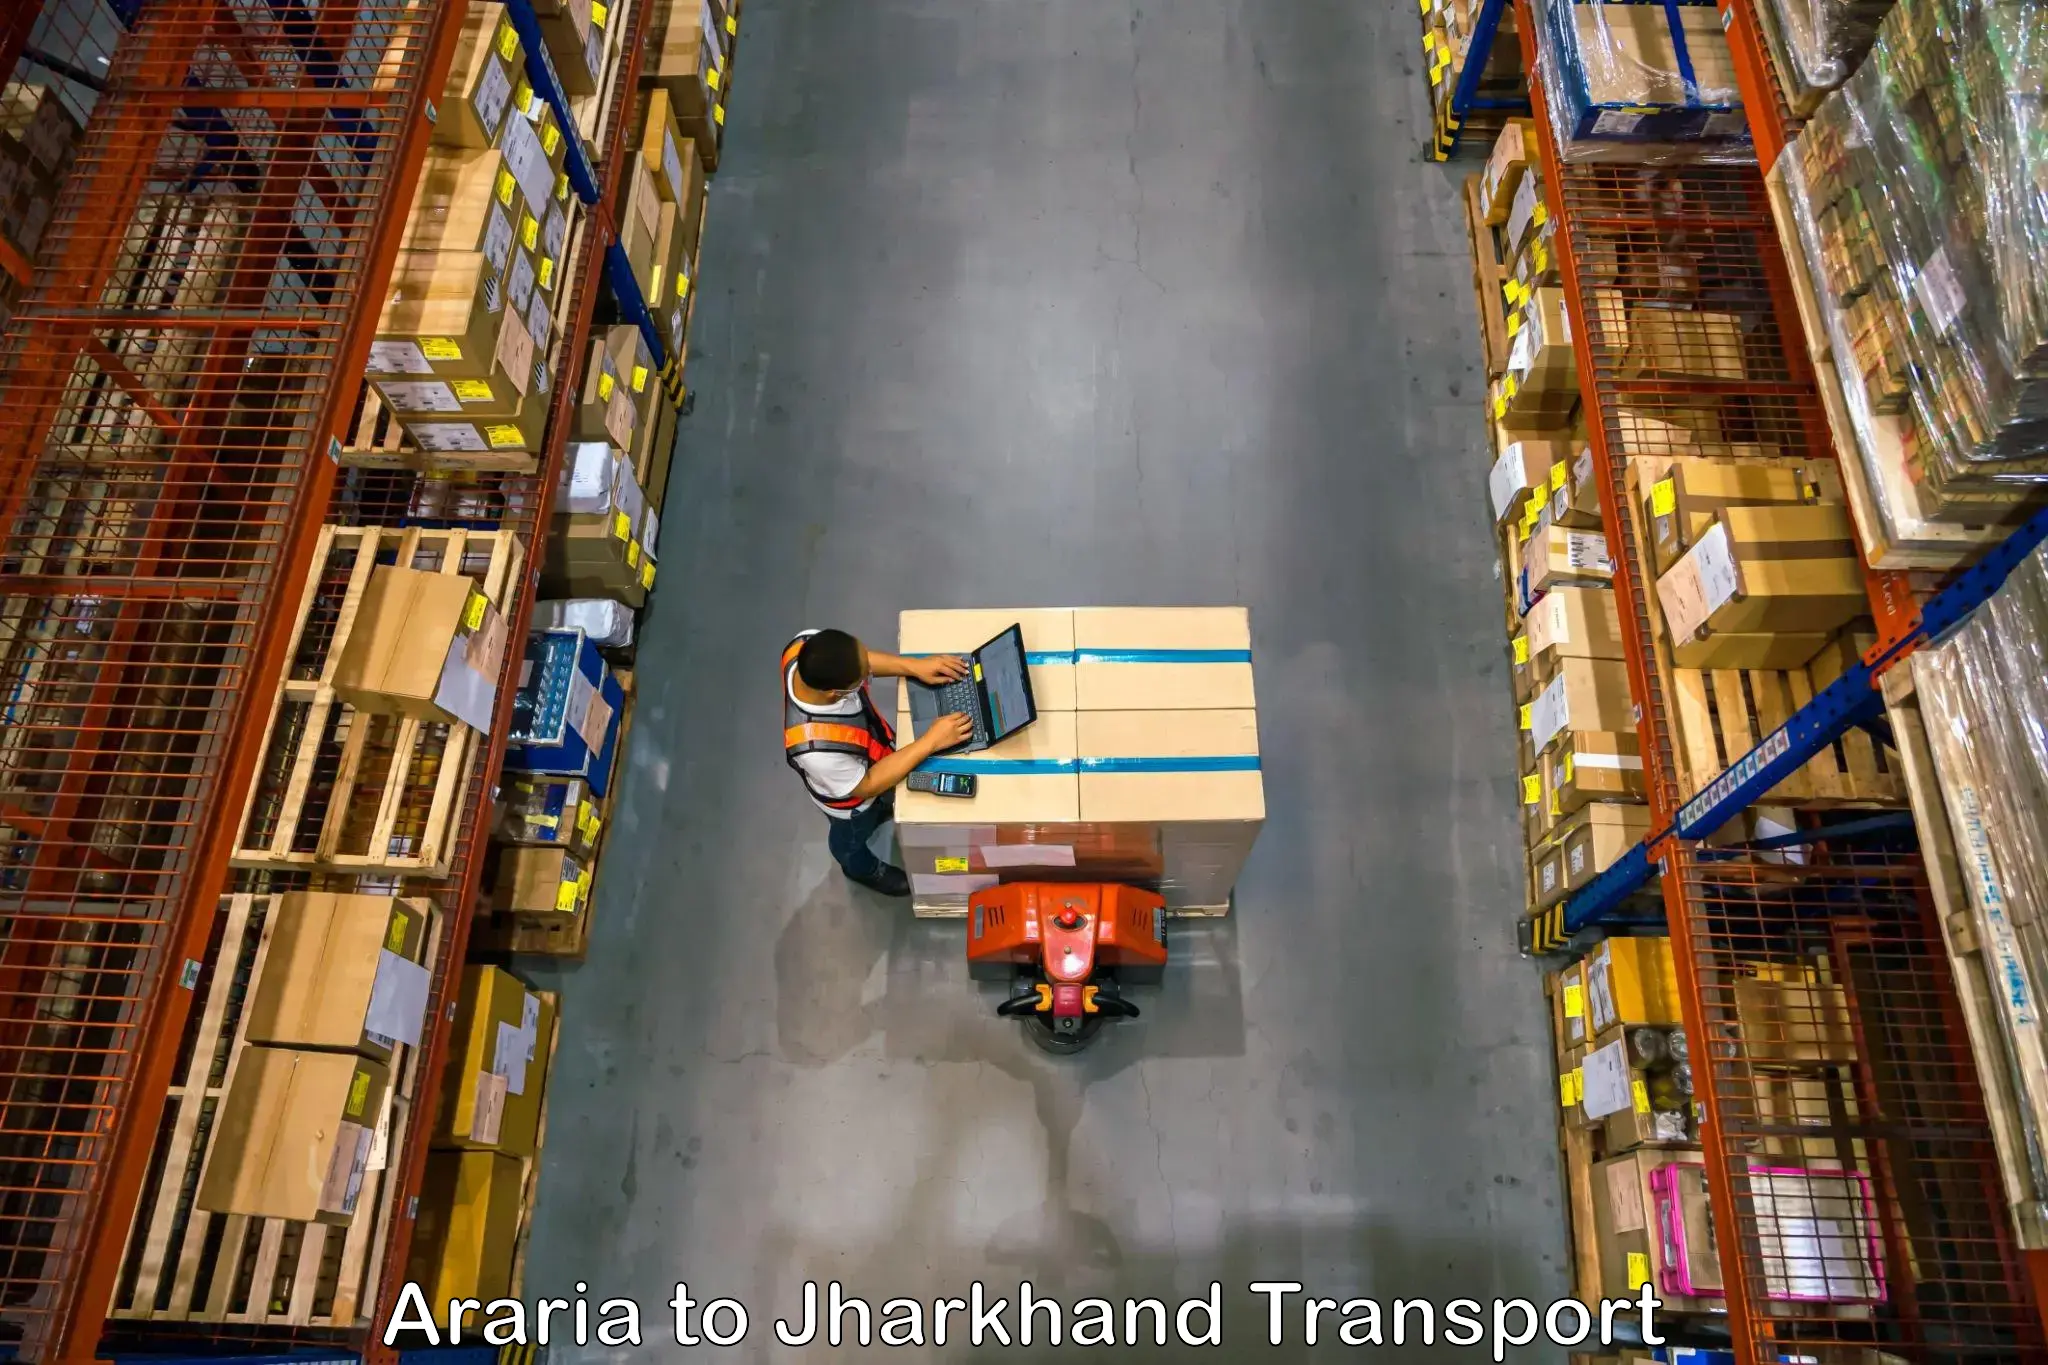 Land transport services Araria to Dhanbad